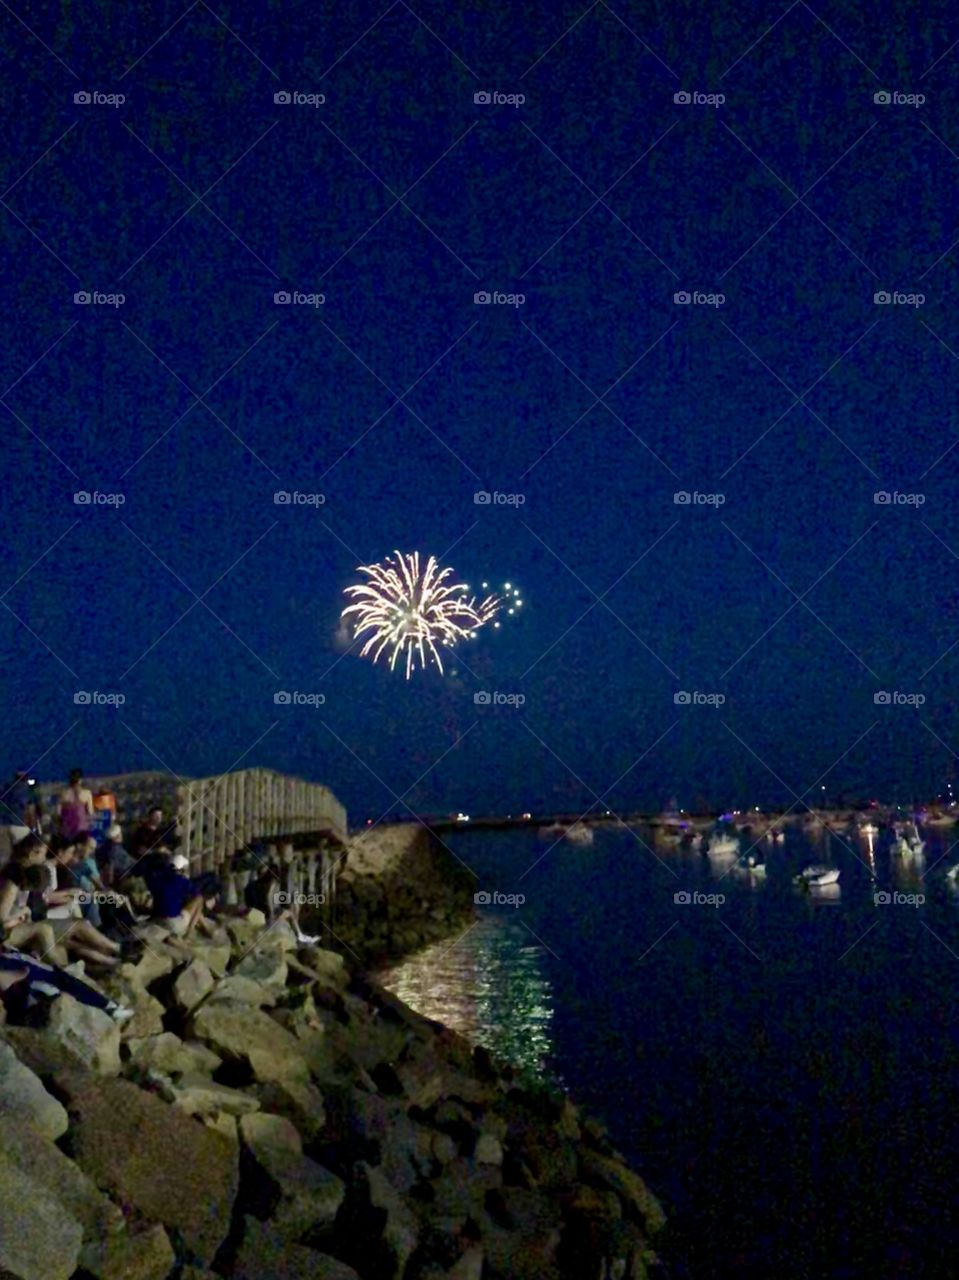 Fireworks display over the jetty and harbor on the evening of the Fourth of July 